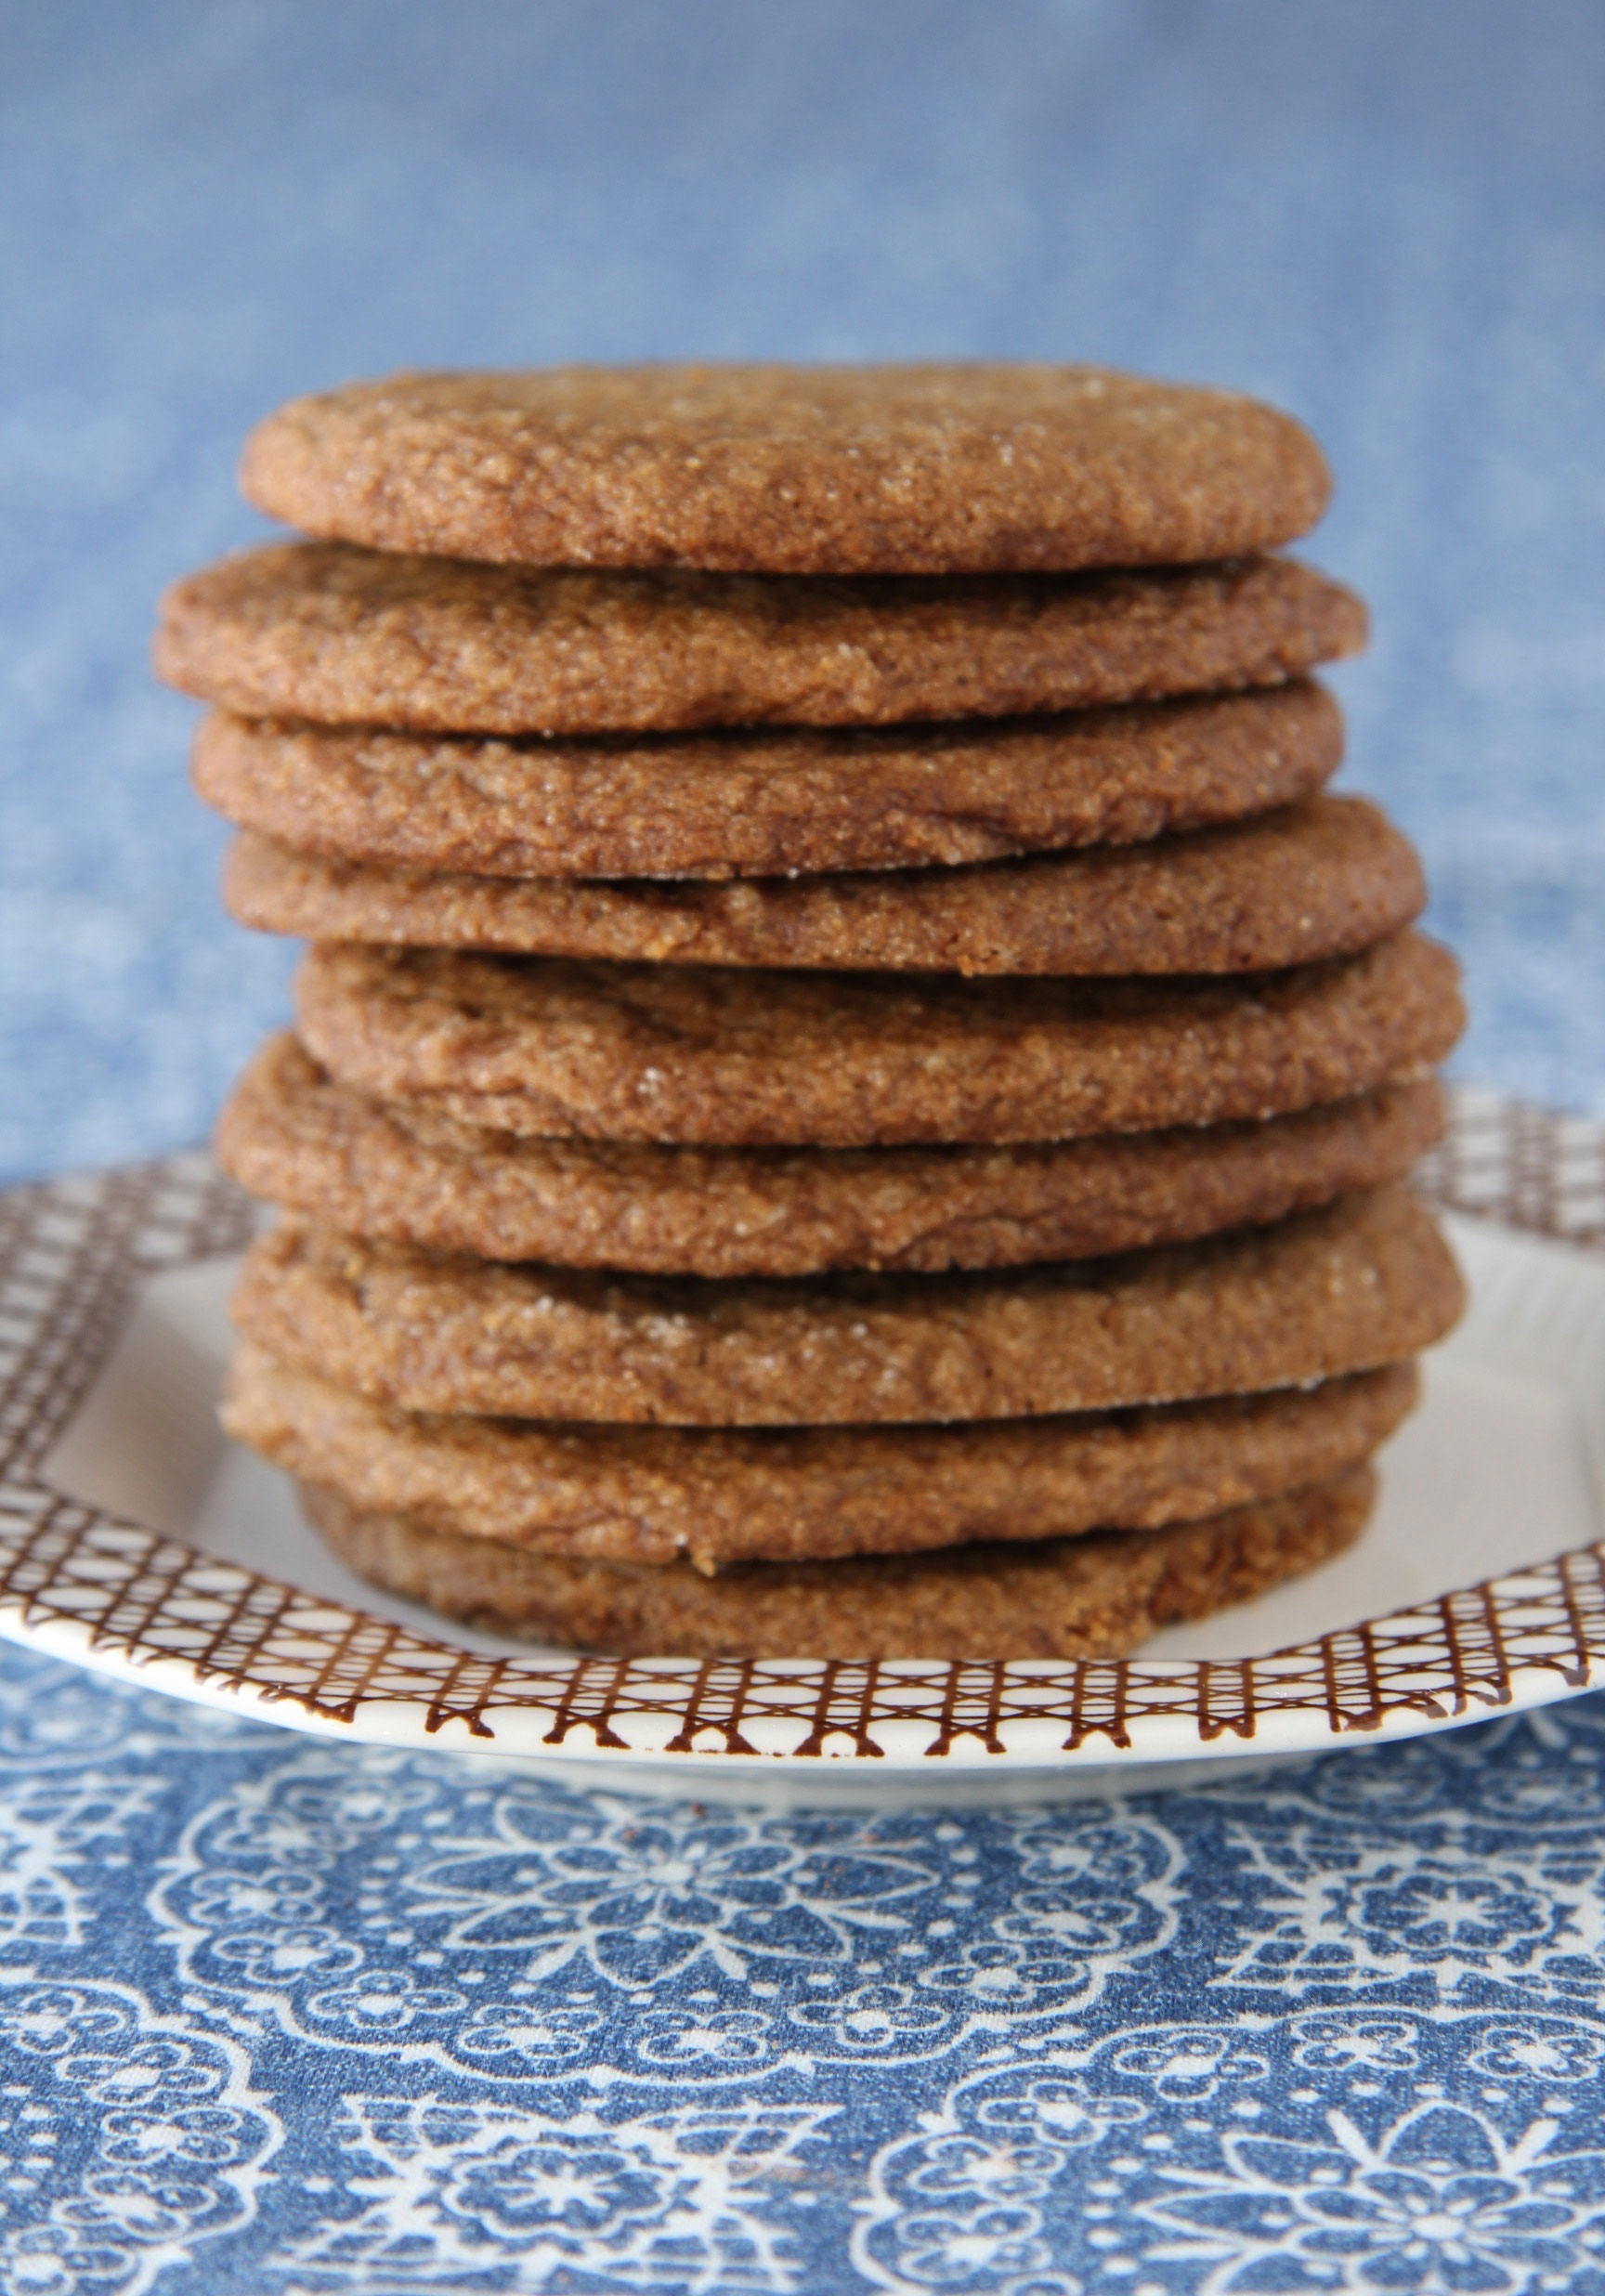 If you want a really good cookie.. makes these ginger cookies!  They are soft, spicy and just the right amount of heat. They really are the BEST!